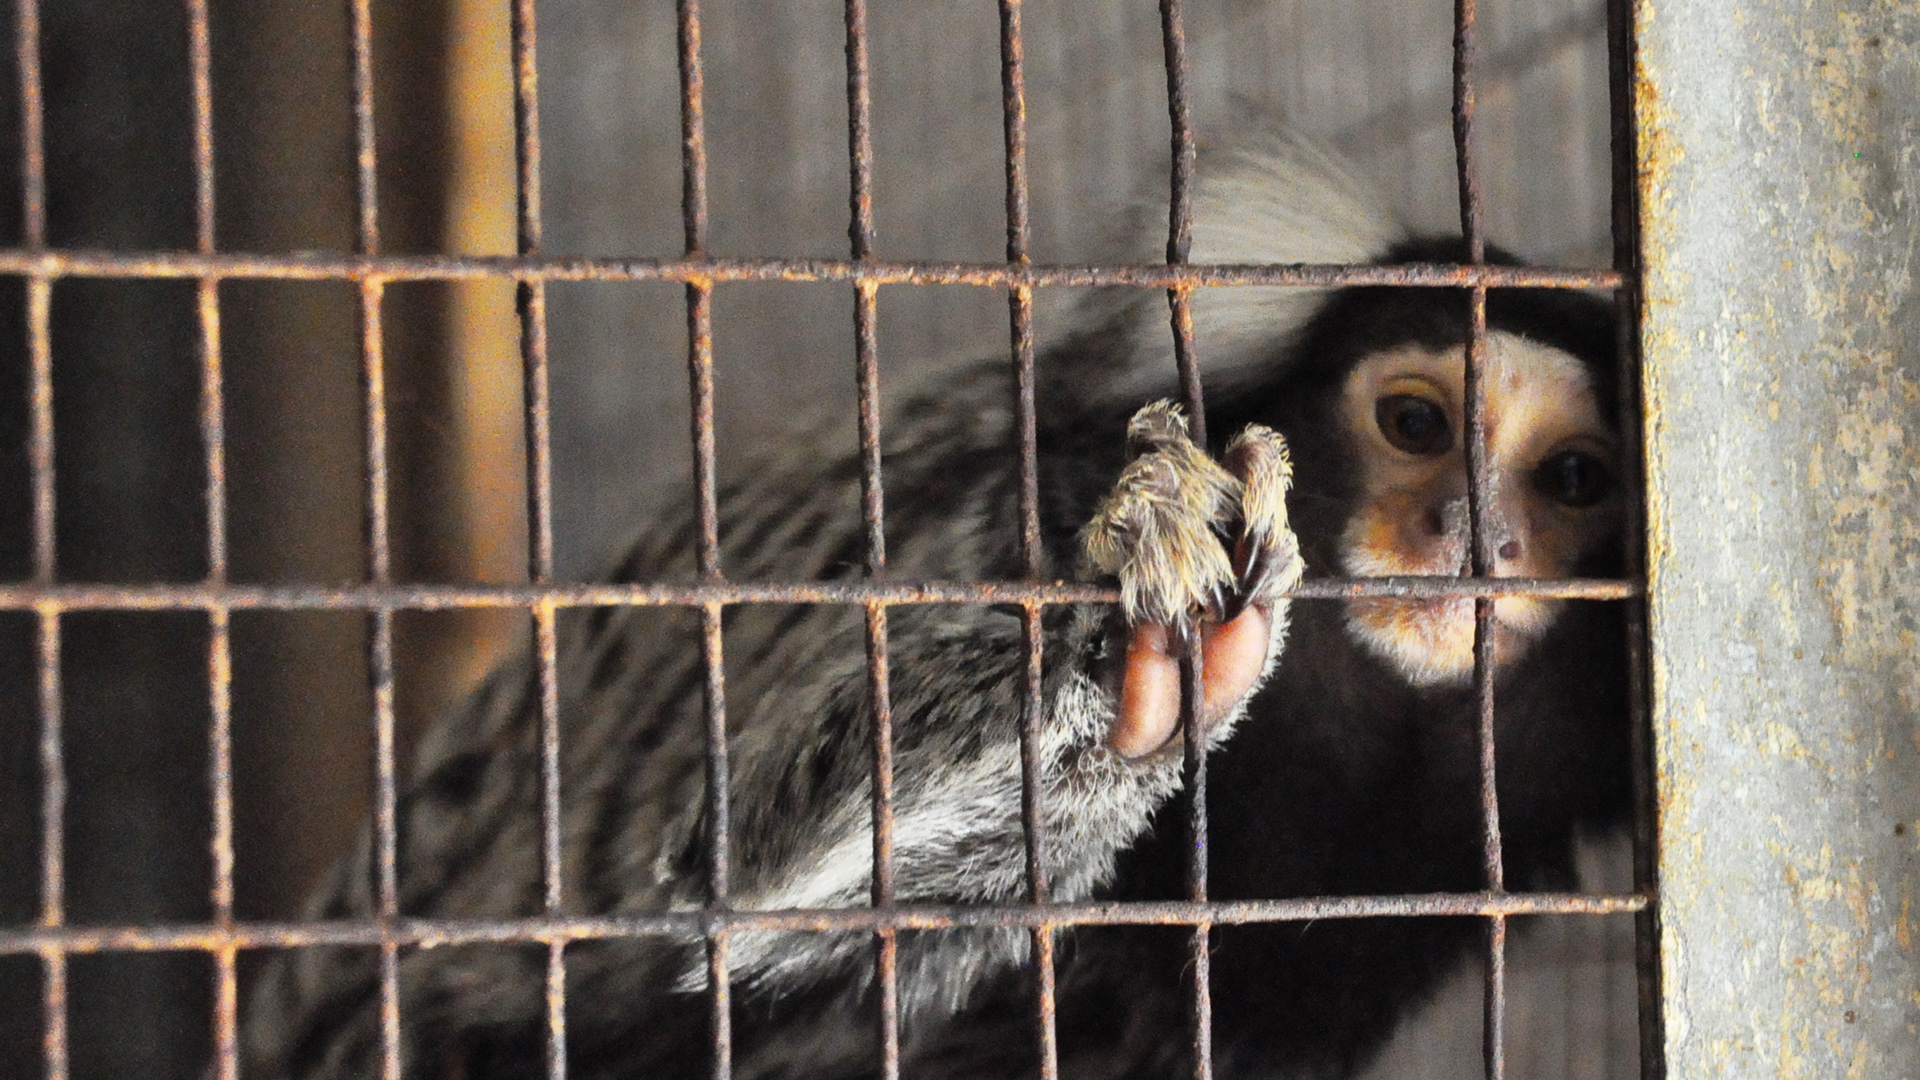 A marmoset in a cage holds on to the bars as it looks through